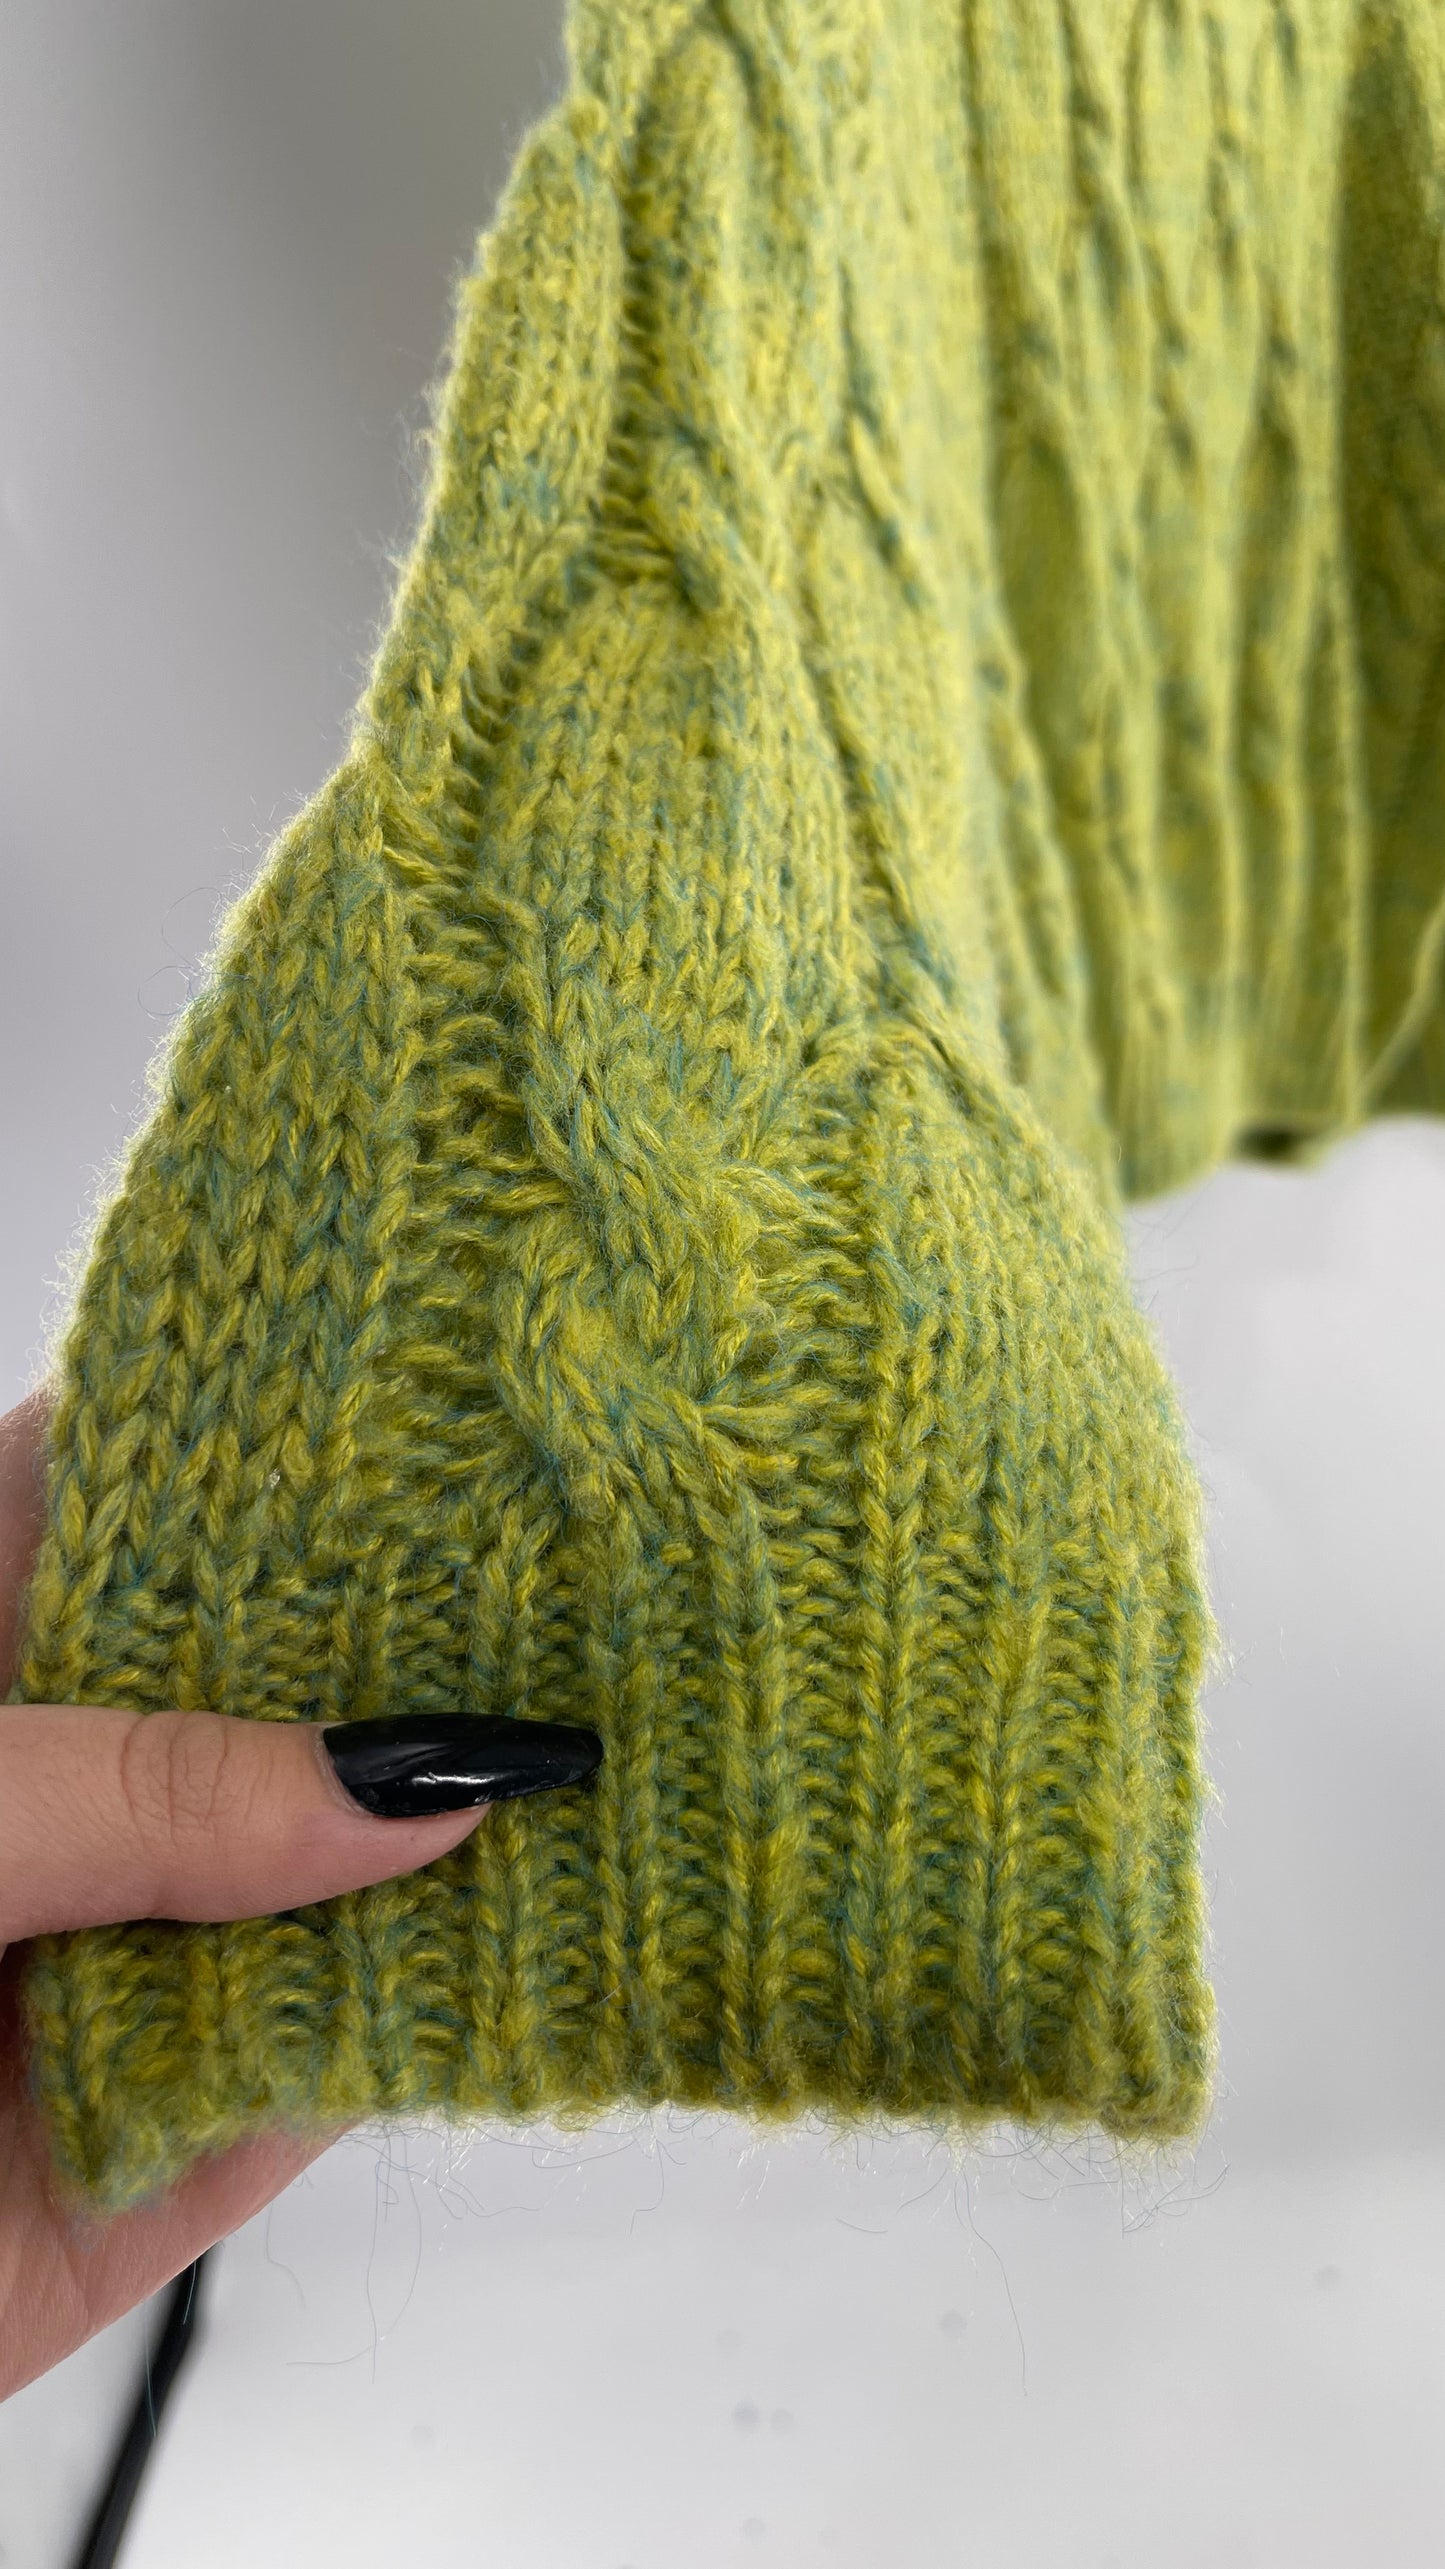 JOA Lime Green/Yellow Cableknit Sweater (S)